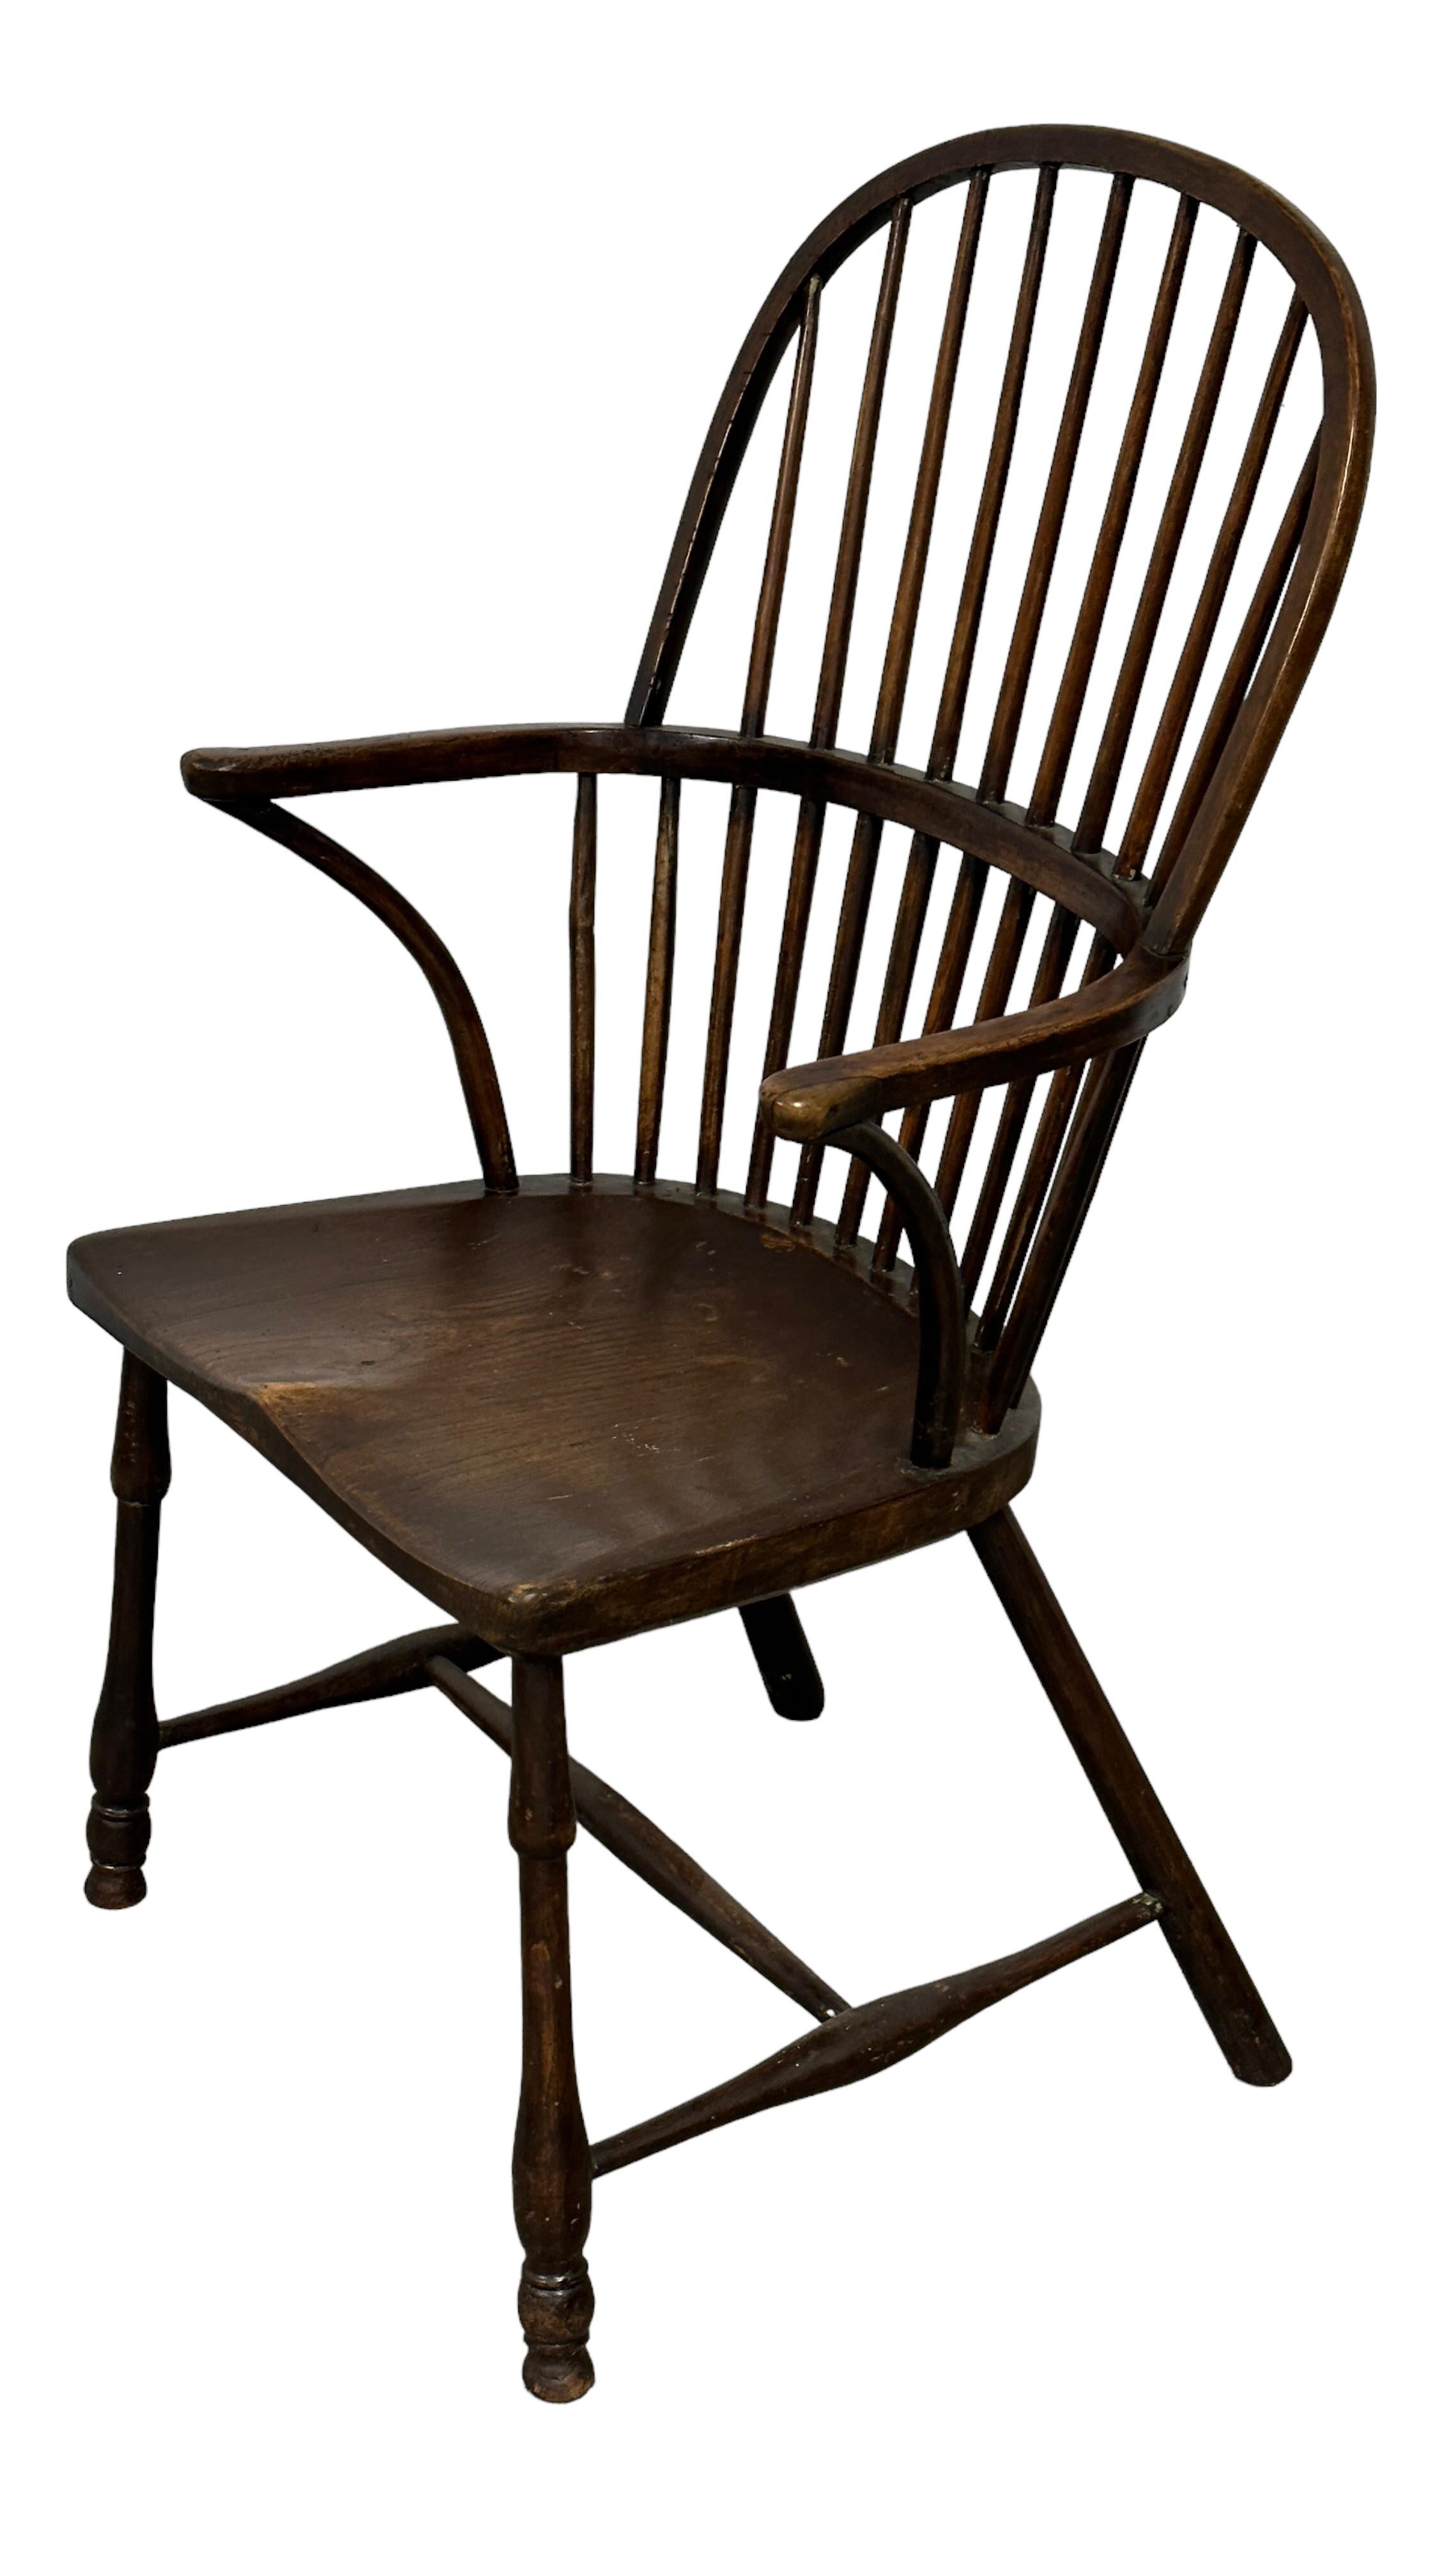 Beautiful Antique Windsor Wooden Chair, 19th Century, England 8